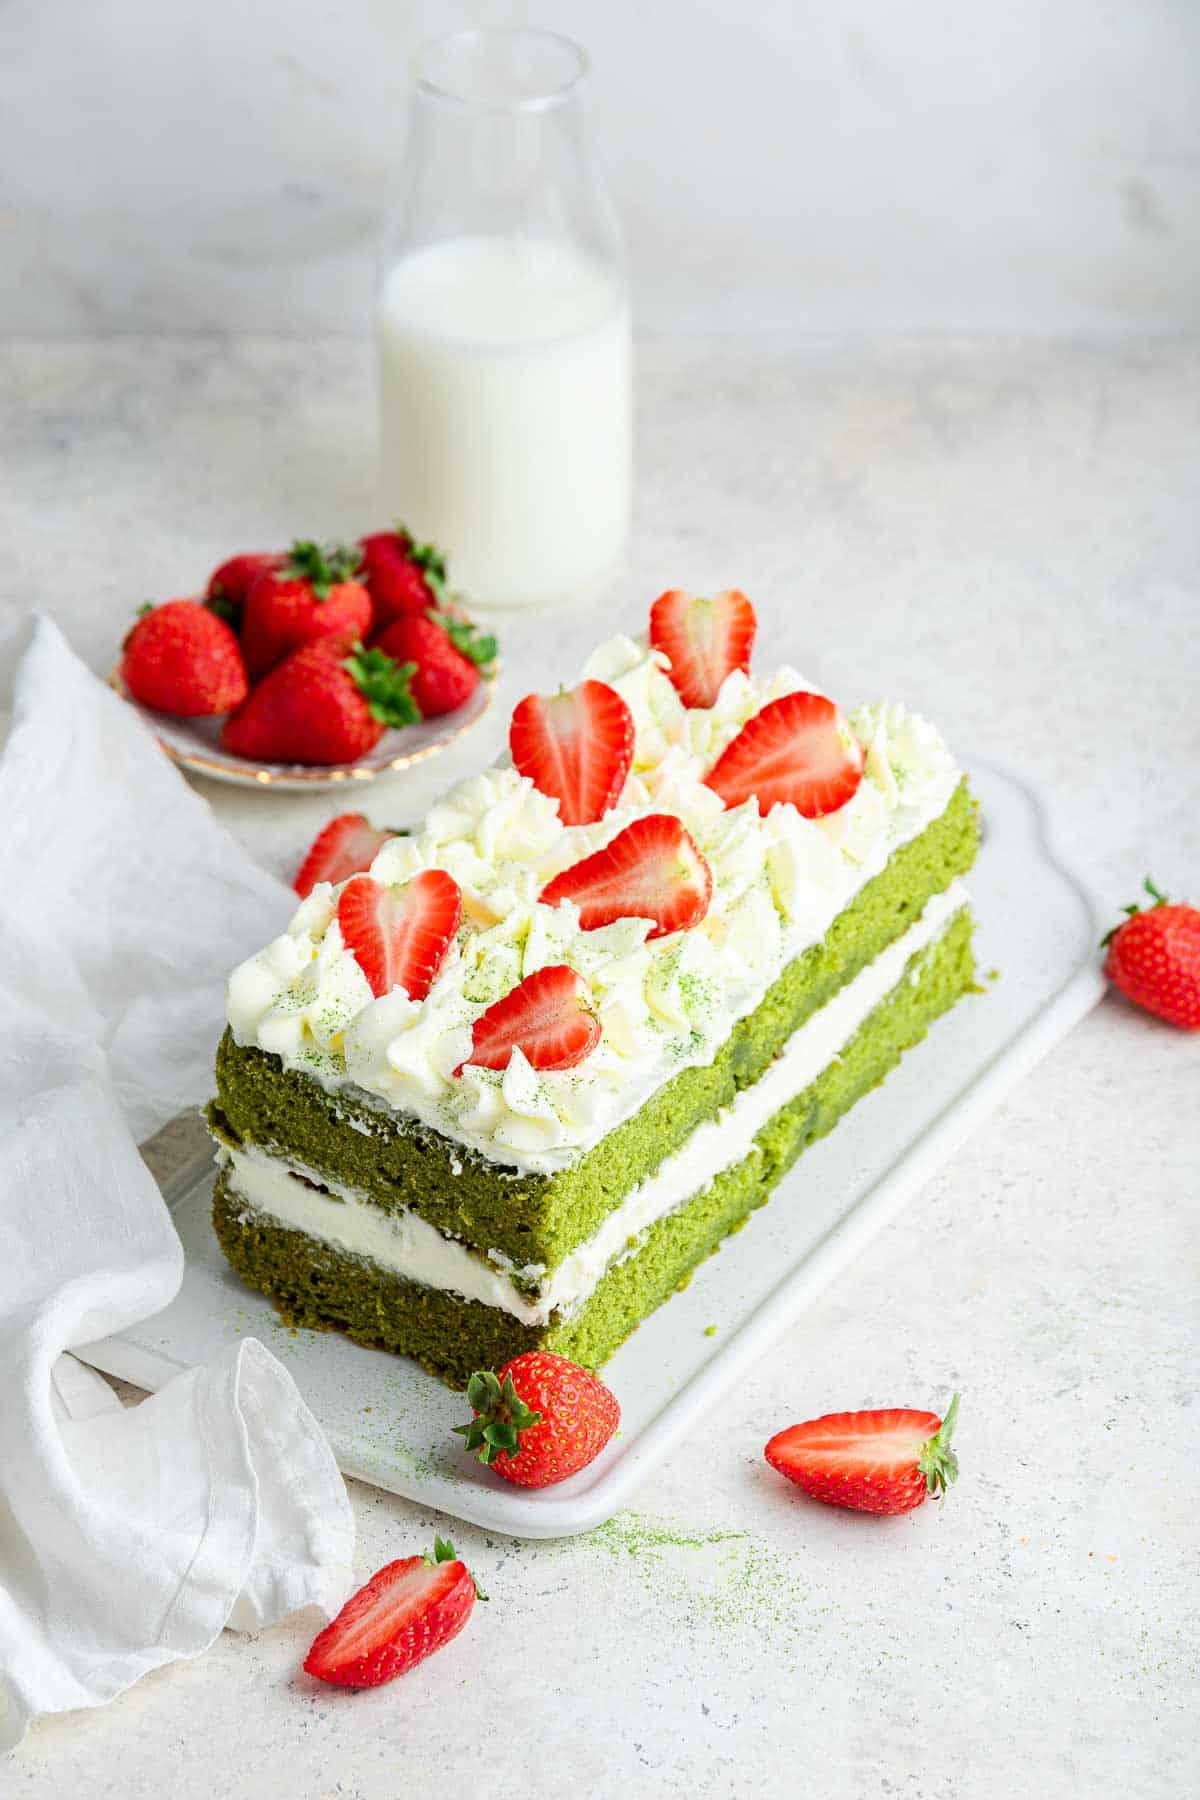 A layer cake made from a loaf pan, decorated with frosting and strawberries.